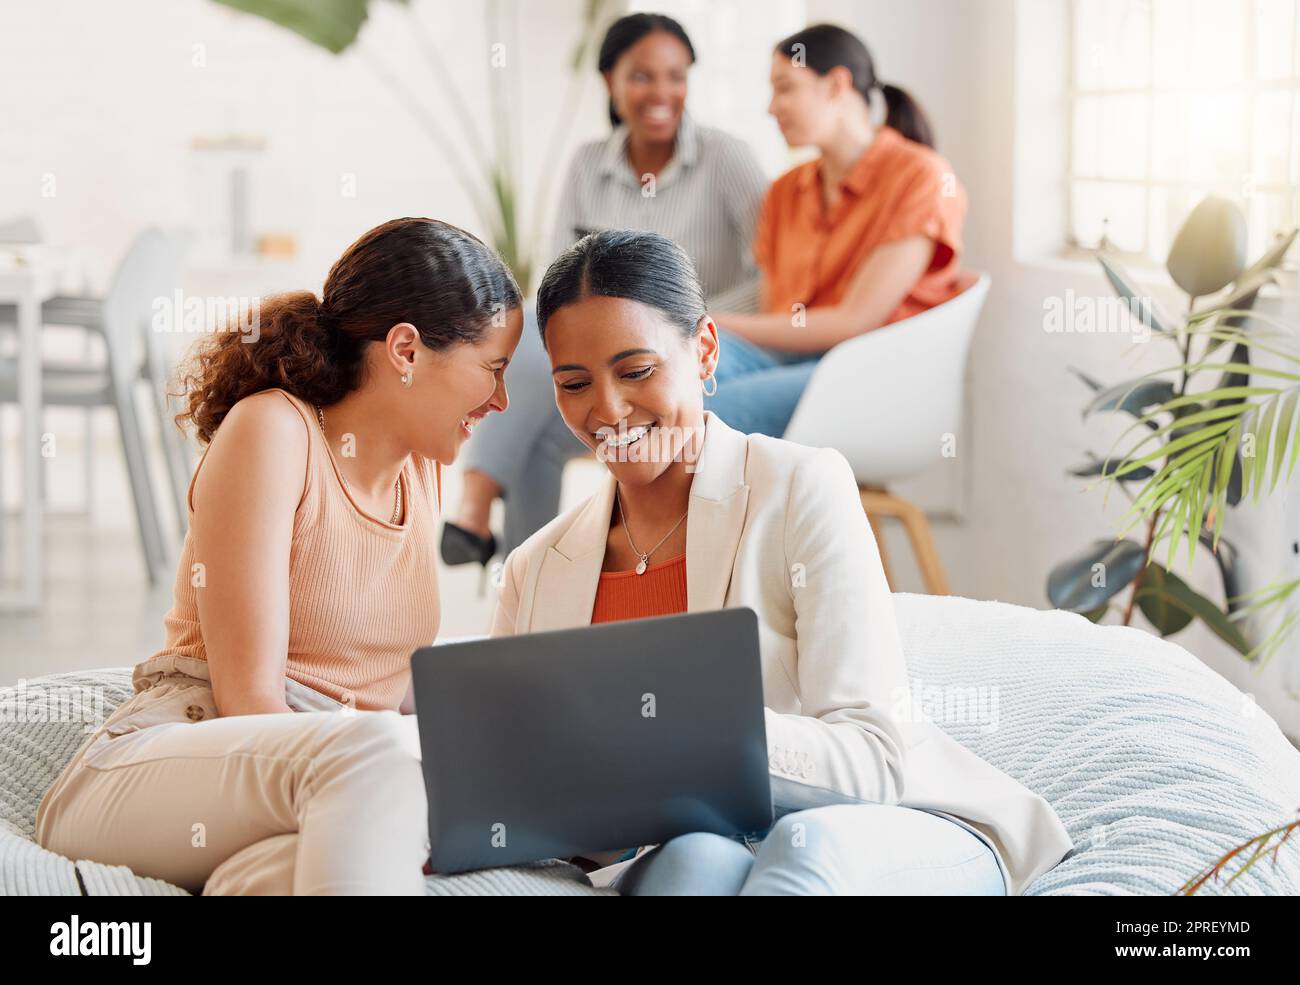 Group of business women on a laptop sitting, laughing looking at social media during a break. Happy ladies bonding on a couch at work. Excited team of girls celebrating new goal achieved at startup Stock Photo